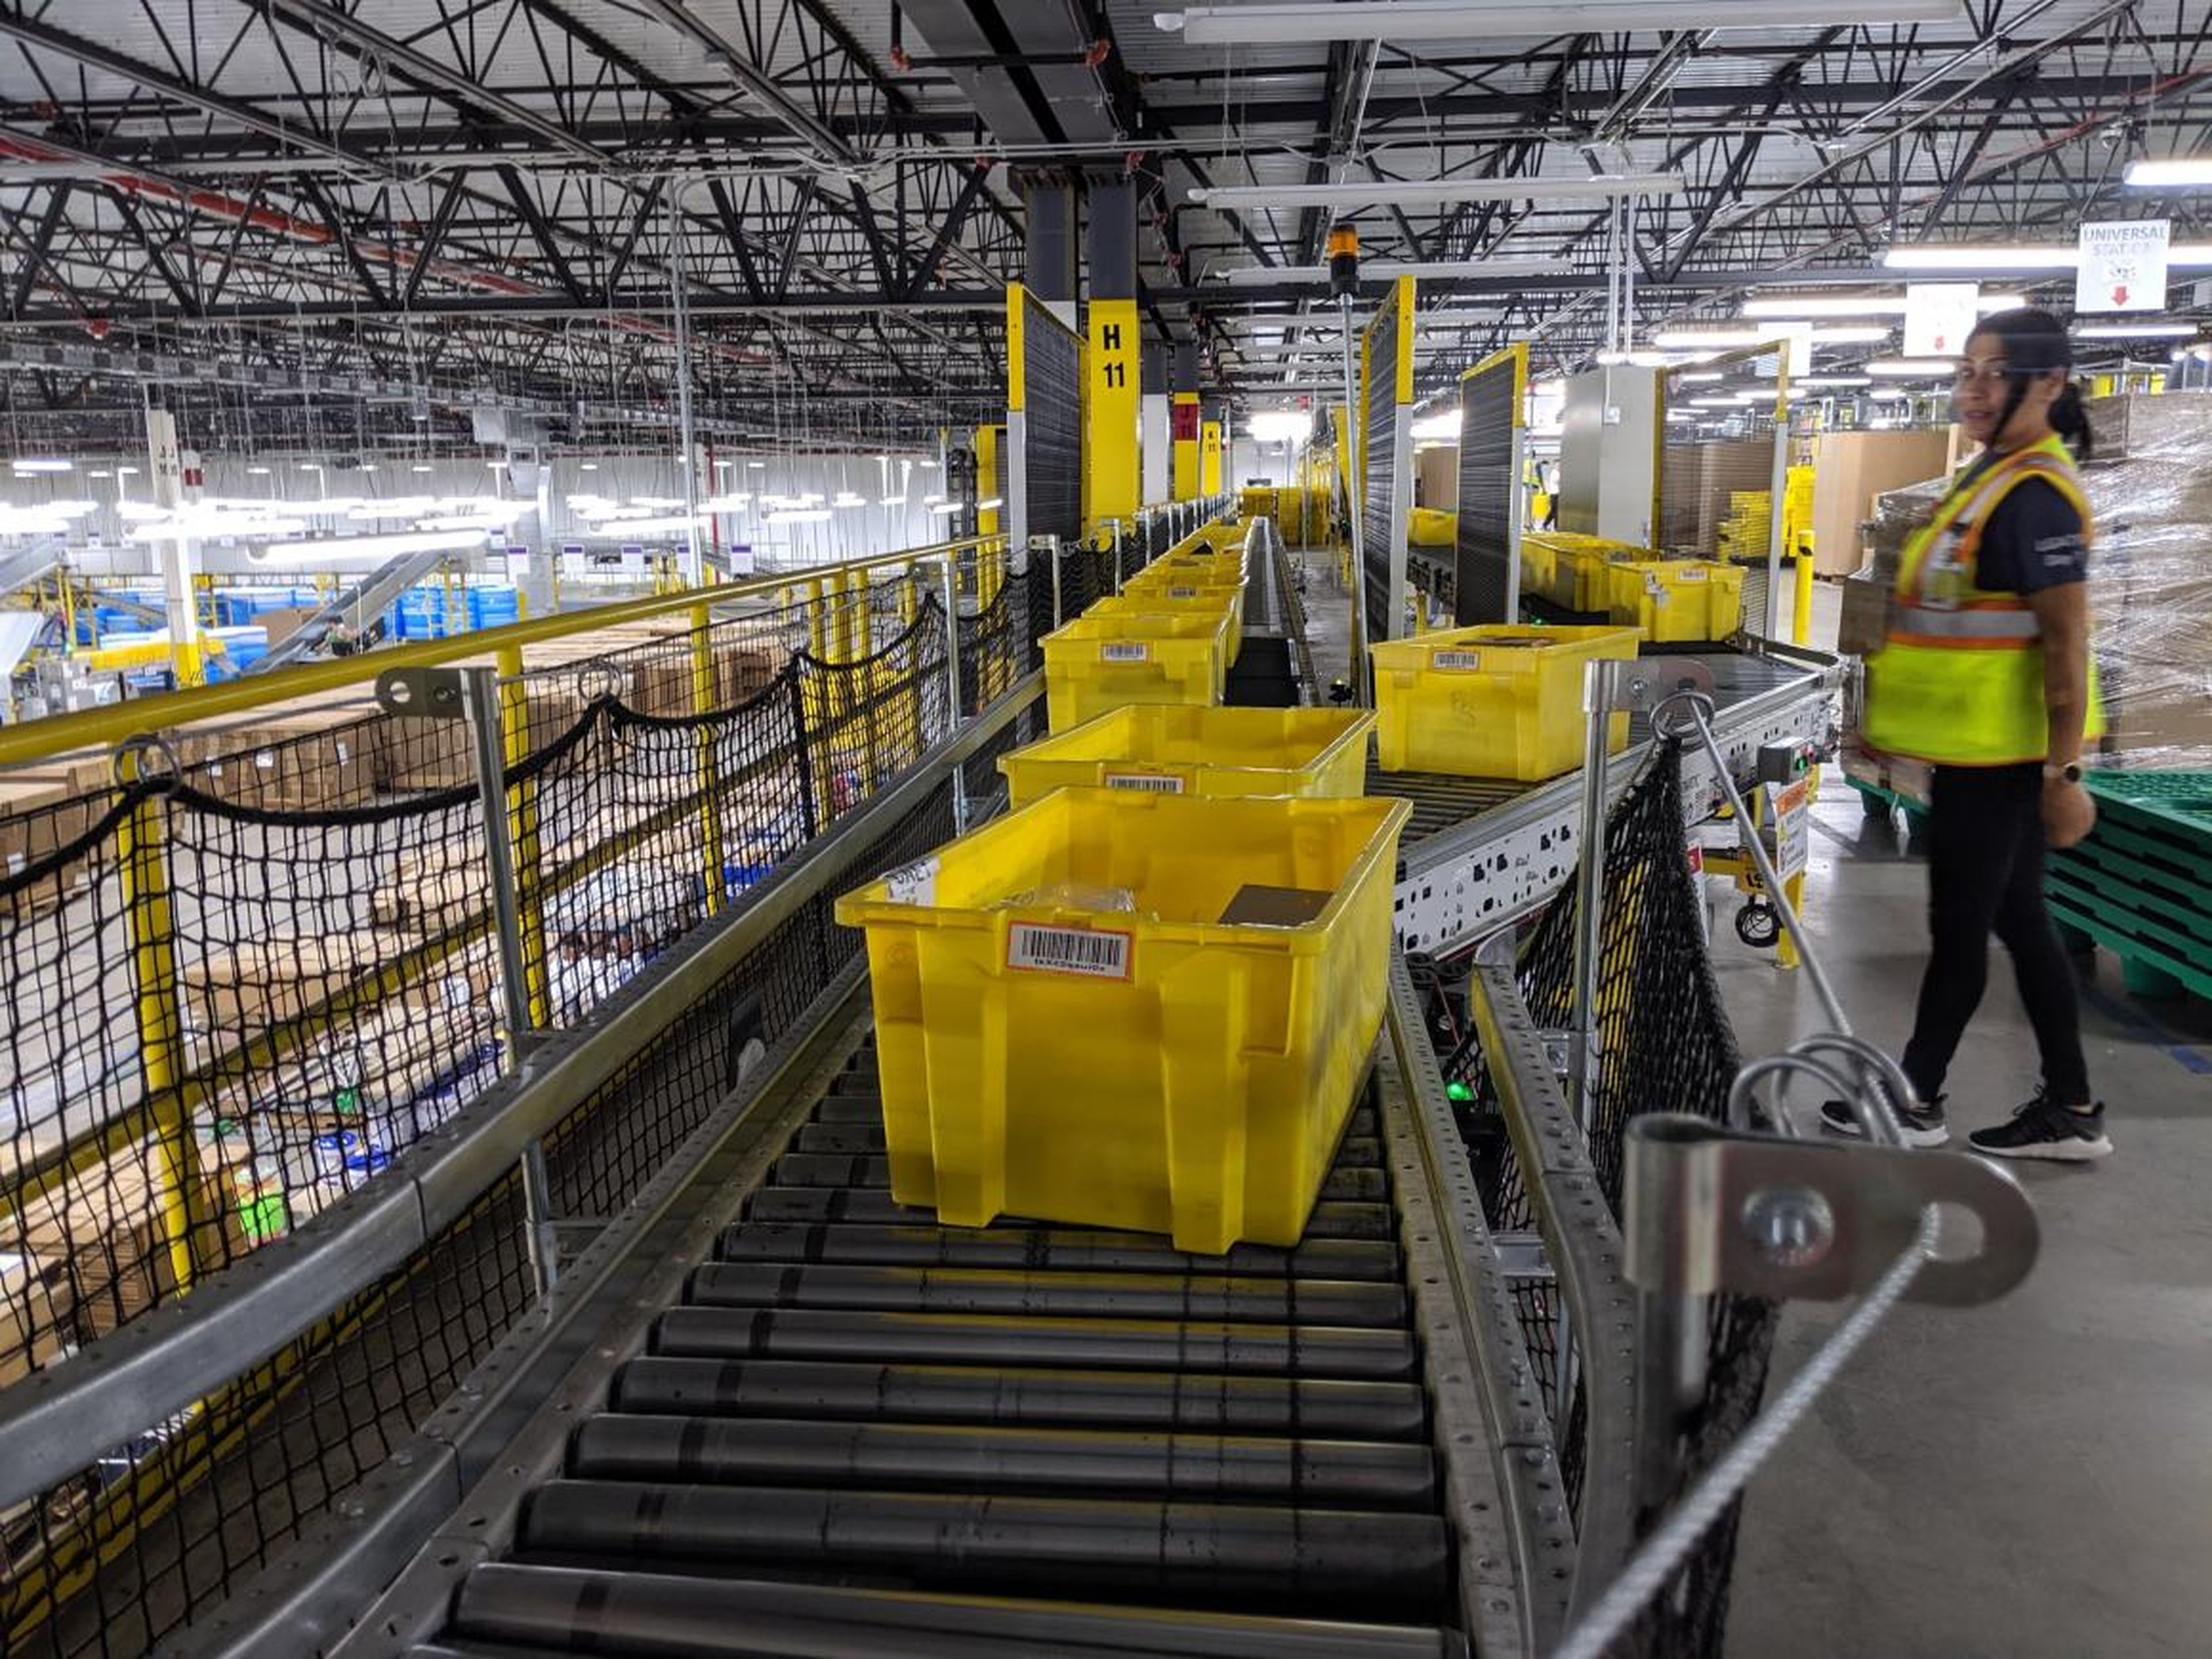 These yellow plastic bins are called "totes" in the fulfillment center — everything that comes in or out of this warehouse must fit within one of these. There are more than 40,000 such bins in this facility alone.